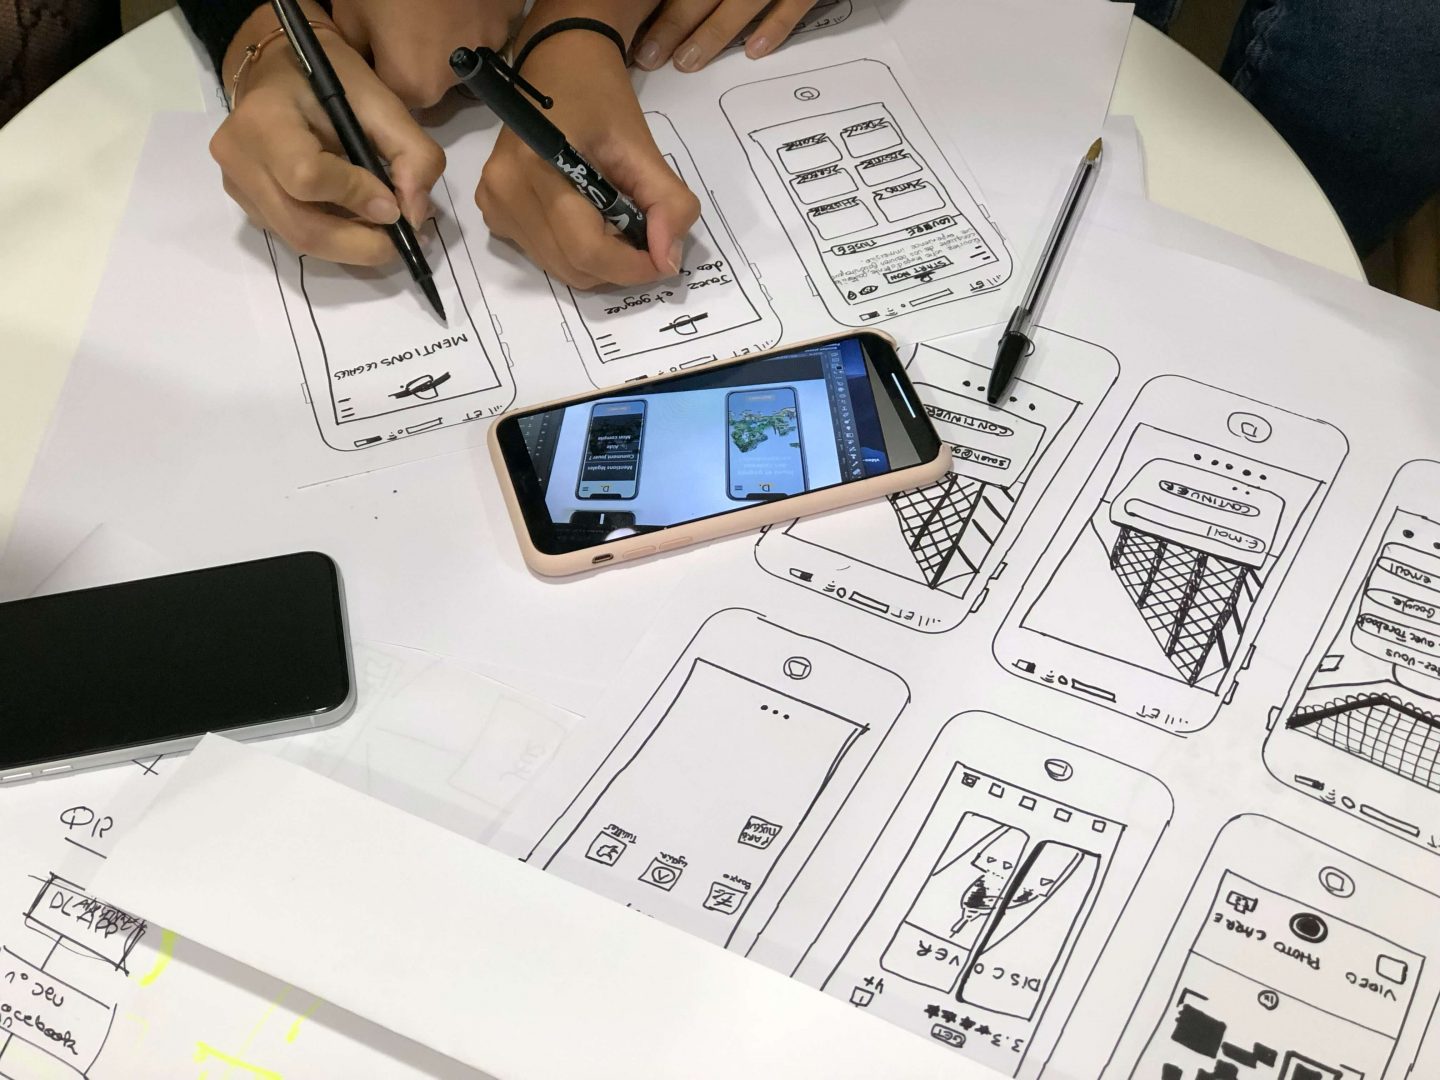 Designing often starts with a piece of paper and a pen to draw initial wireframes of the project.